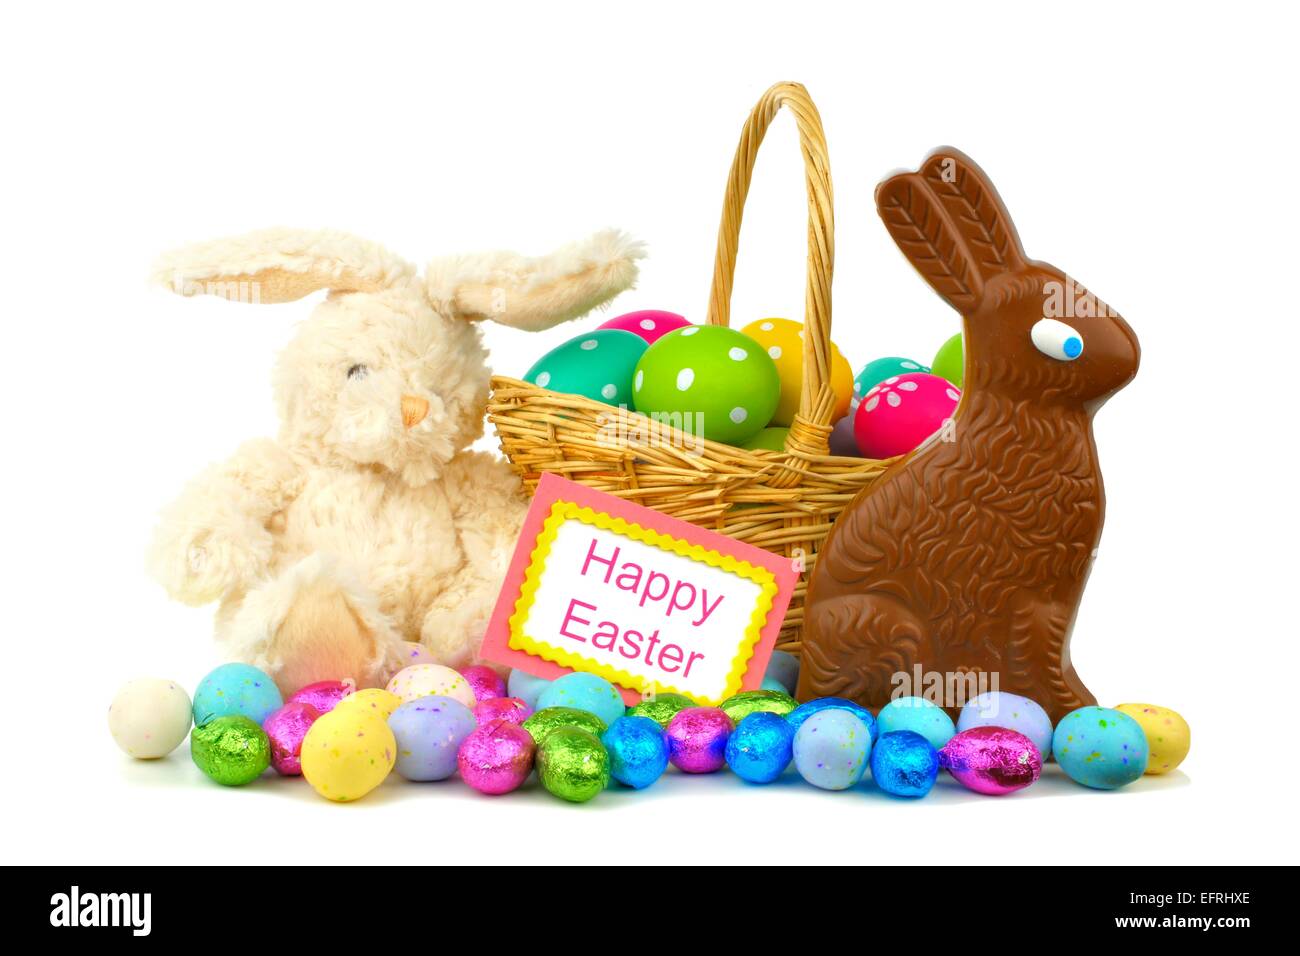 Happy Easter card with Easter basket, candies and toy bunny over white Stock Photo